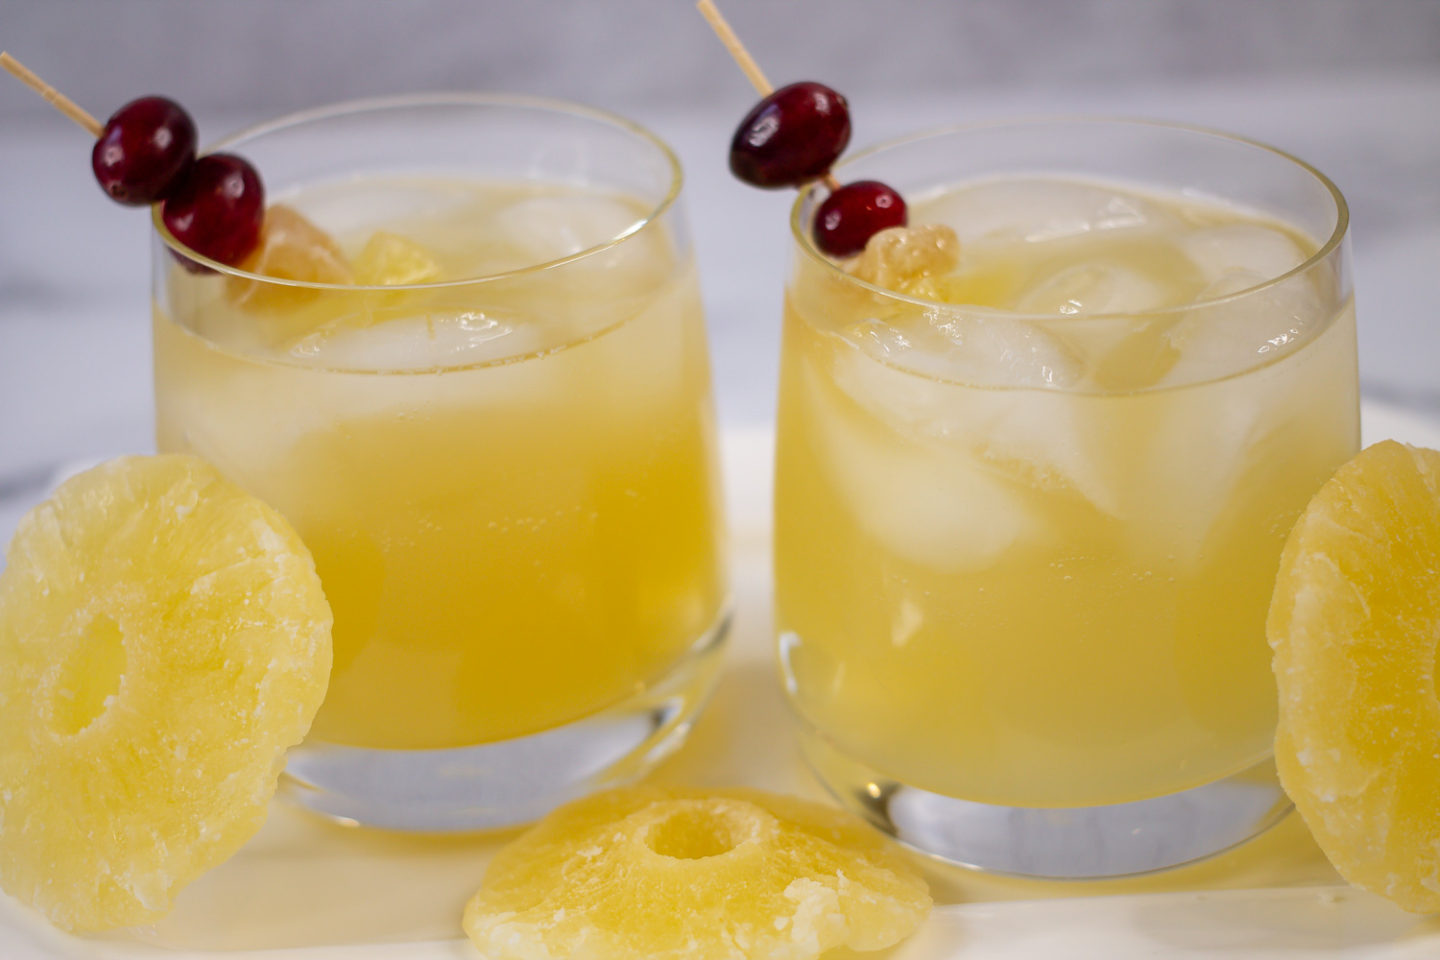 Two Glasses of Mexican Mule Cocktails with Fresh Cranberries and Dried Ginger and Pineapple garnish with rounds of dried pineapple